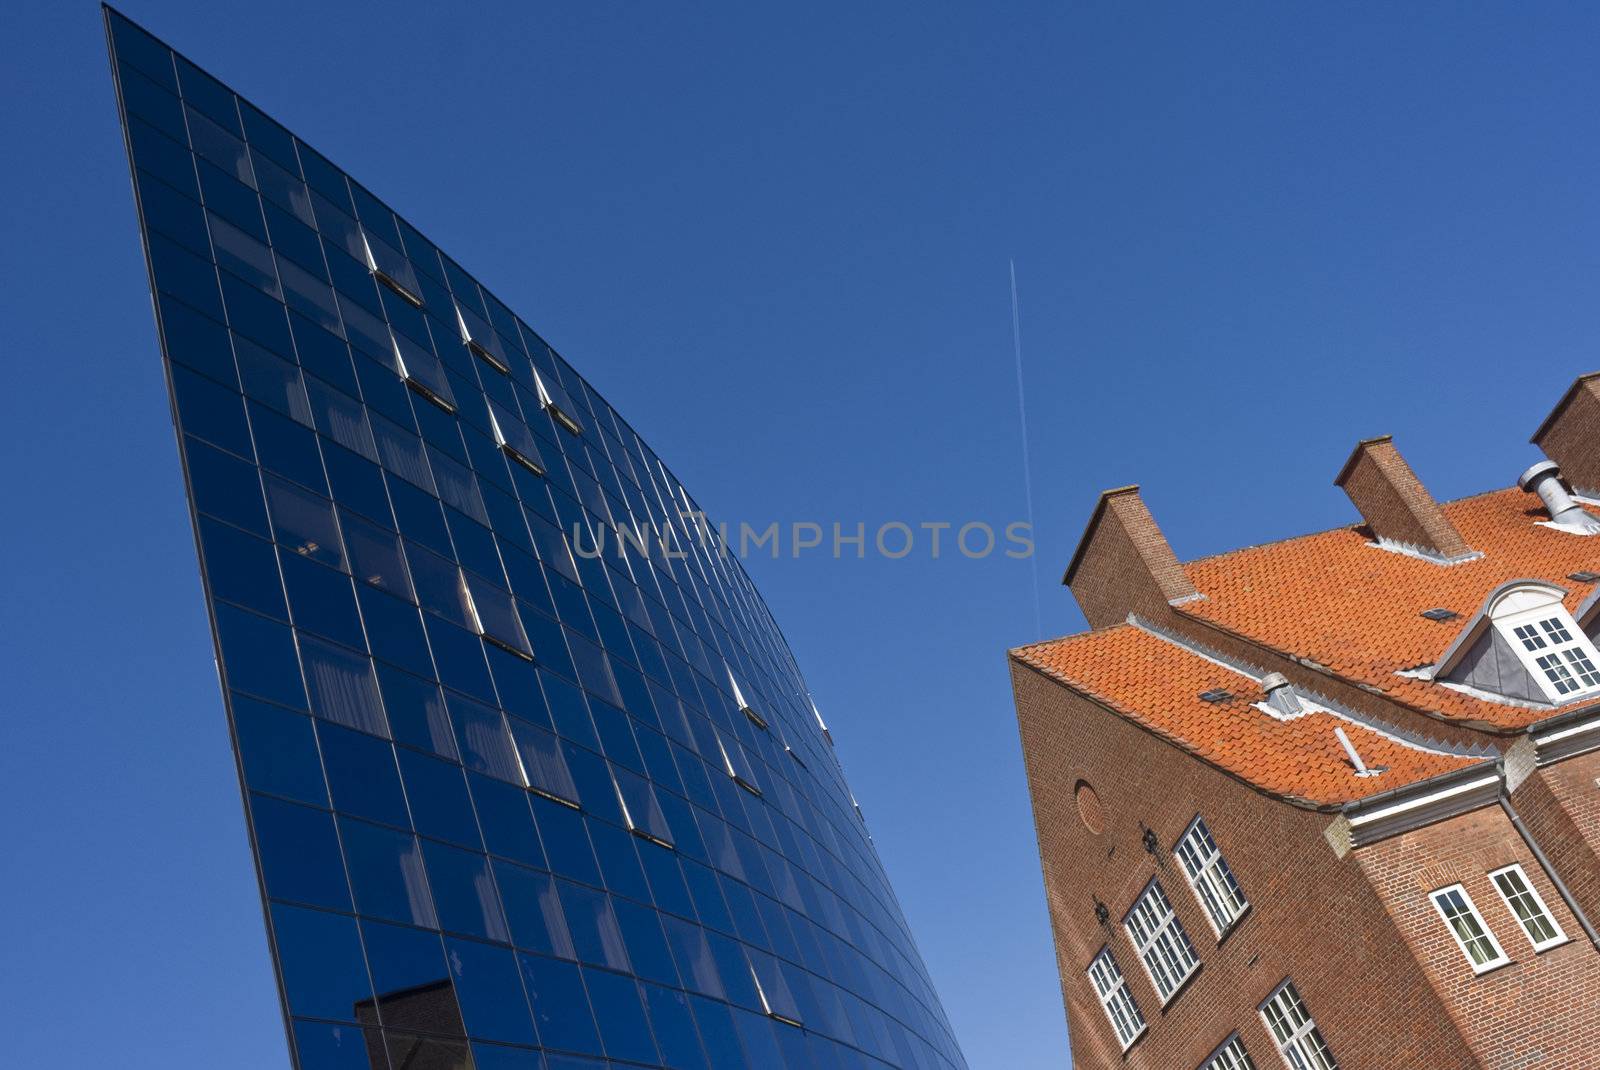 New and old hospital by ABCDK